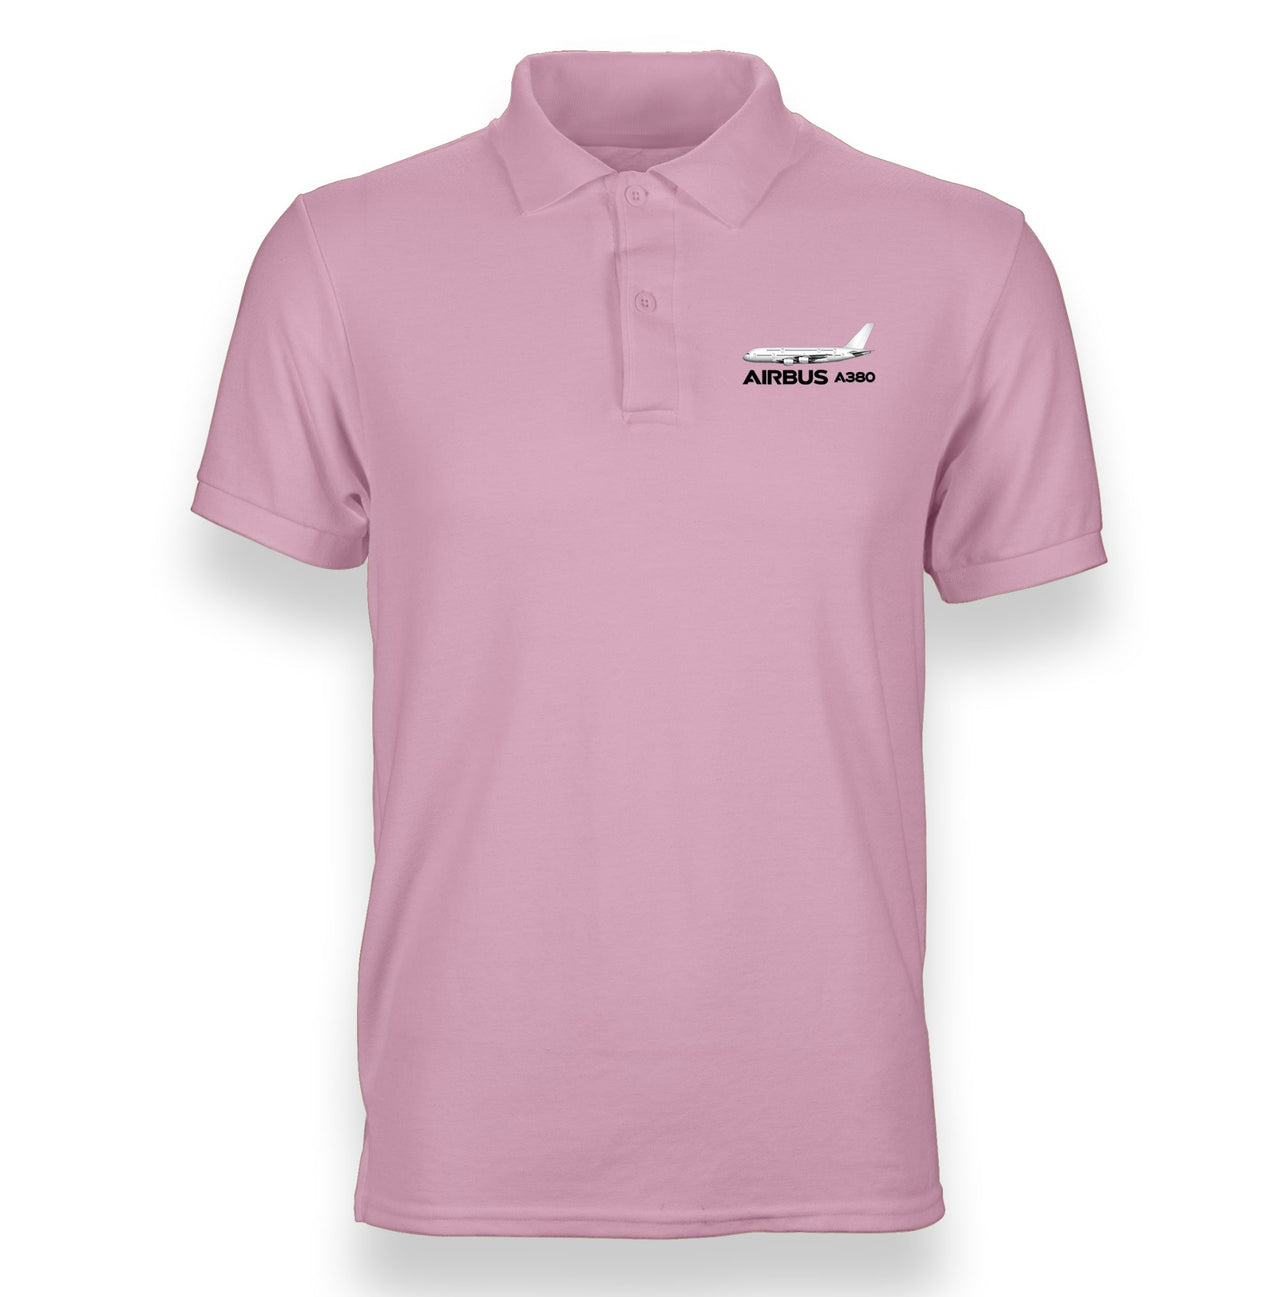 The Airbus A380 Designed "WOMEN" Polo T-Shirts